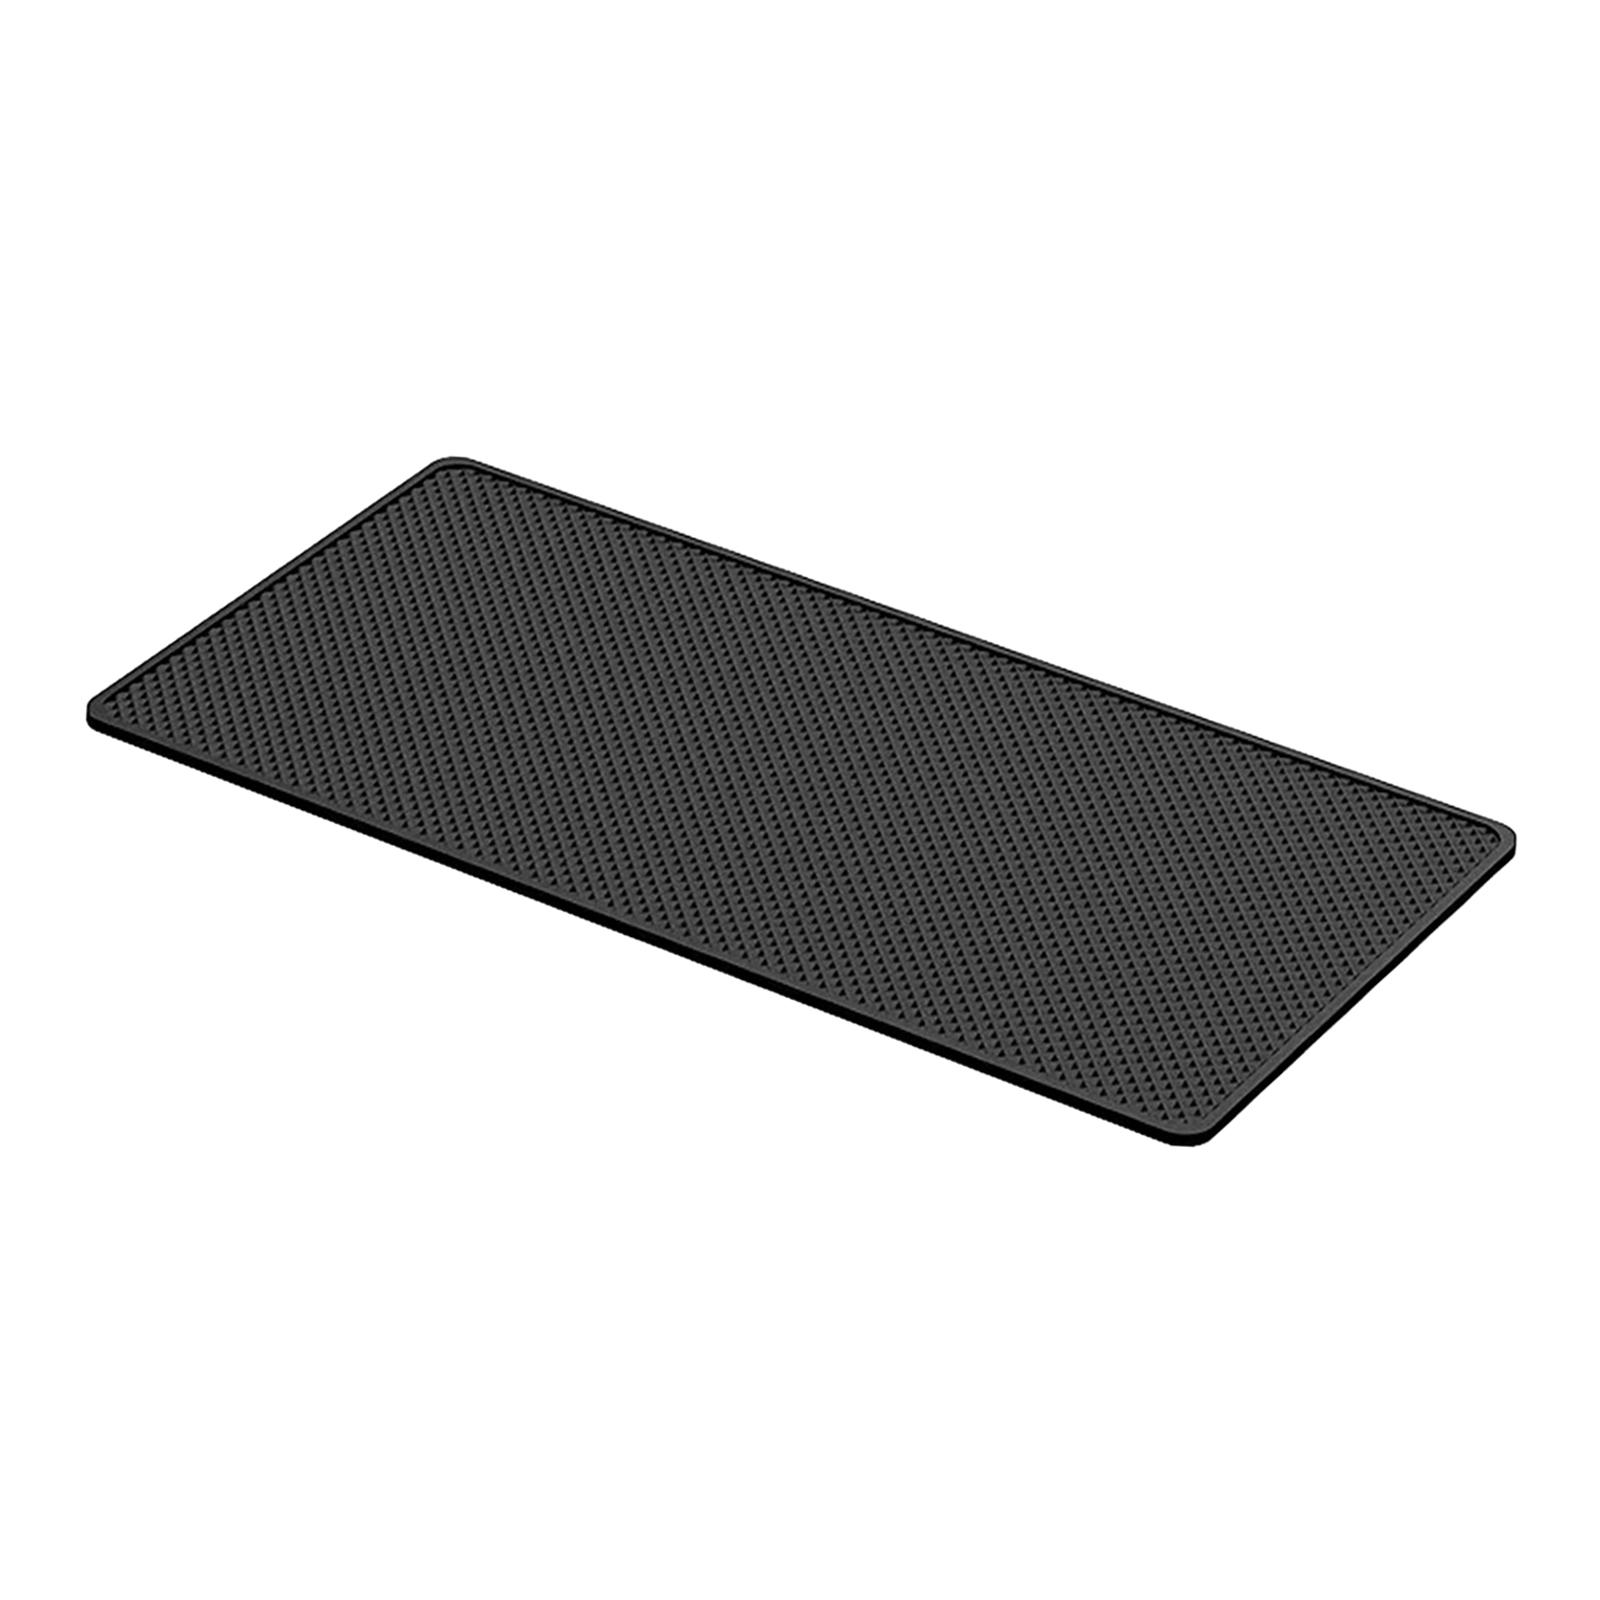 Anti Slip Pad for Car Dashboard Car Sticky Mat for Phones Figurine S